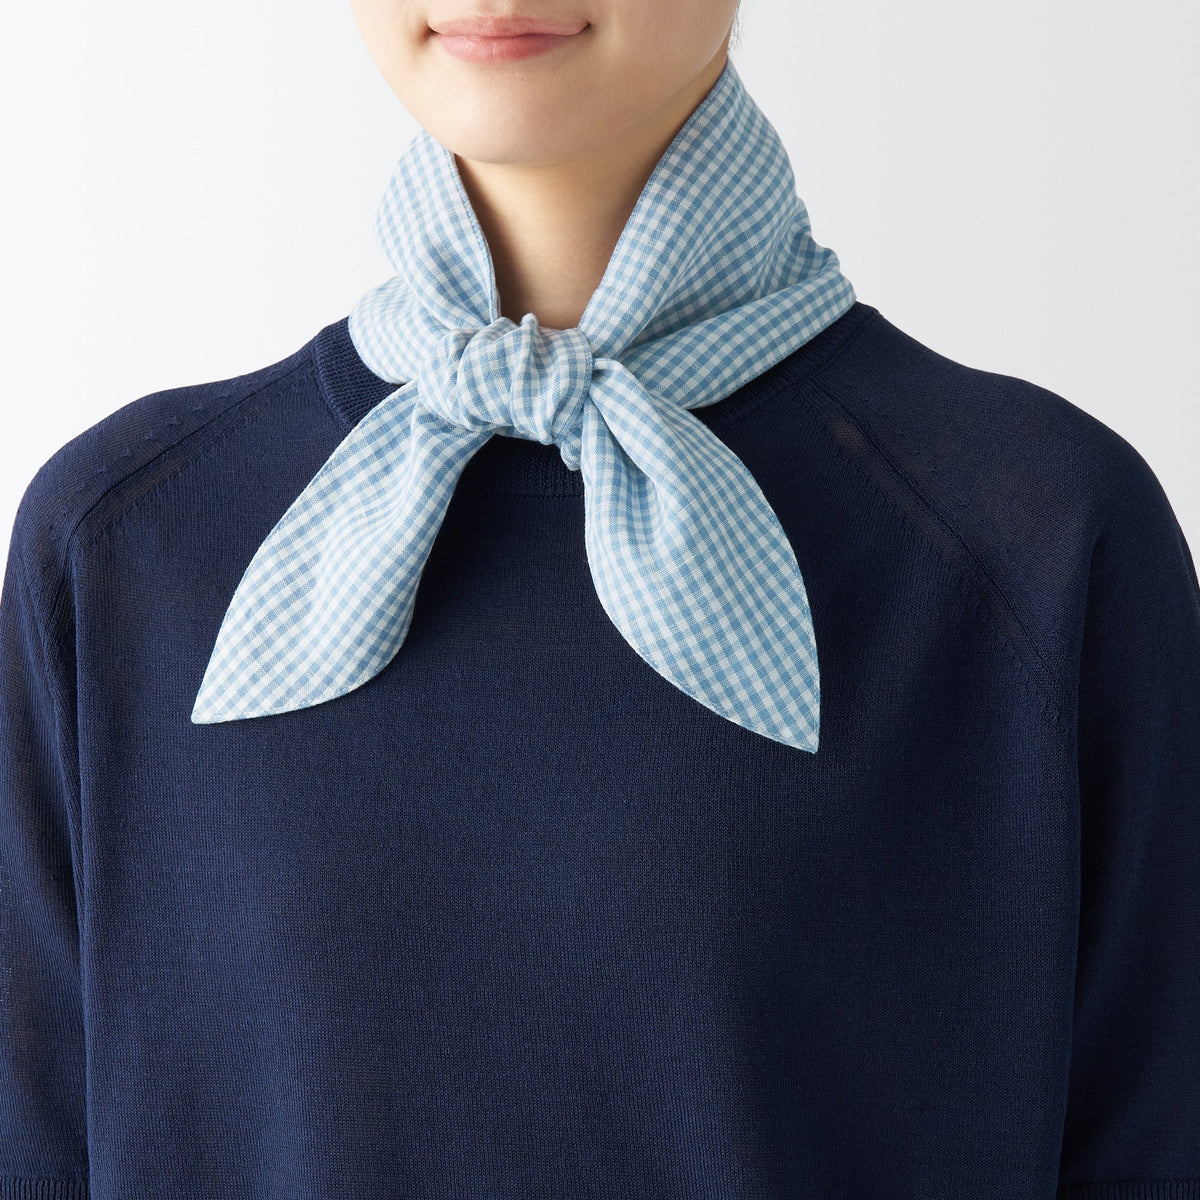 Cool Touch Patterned Scarf with Pocket | Spring Scarves | MUJI USA